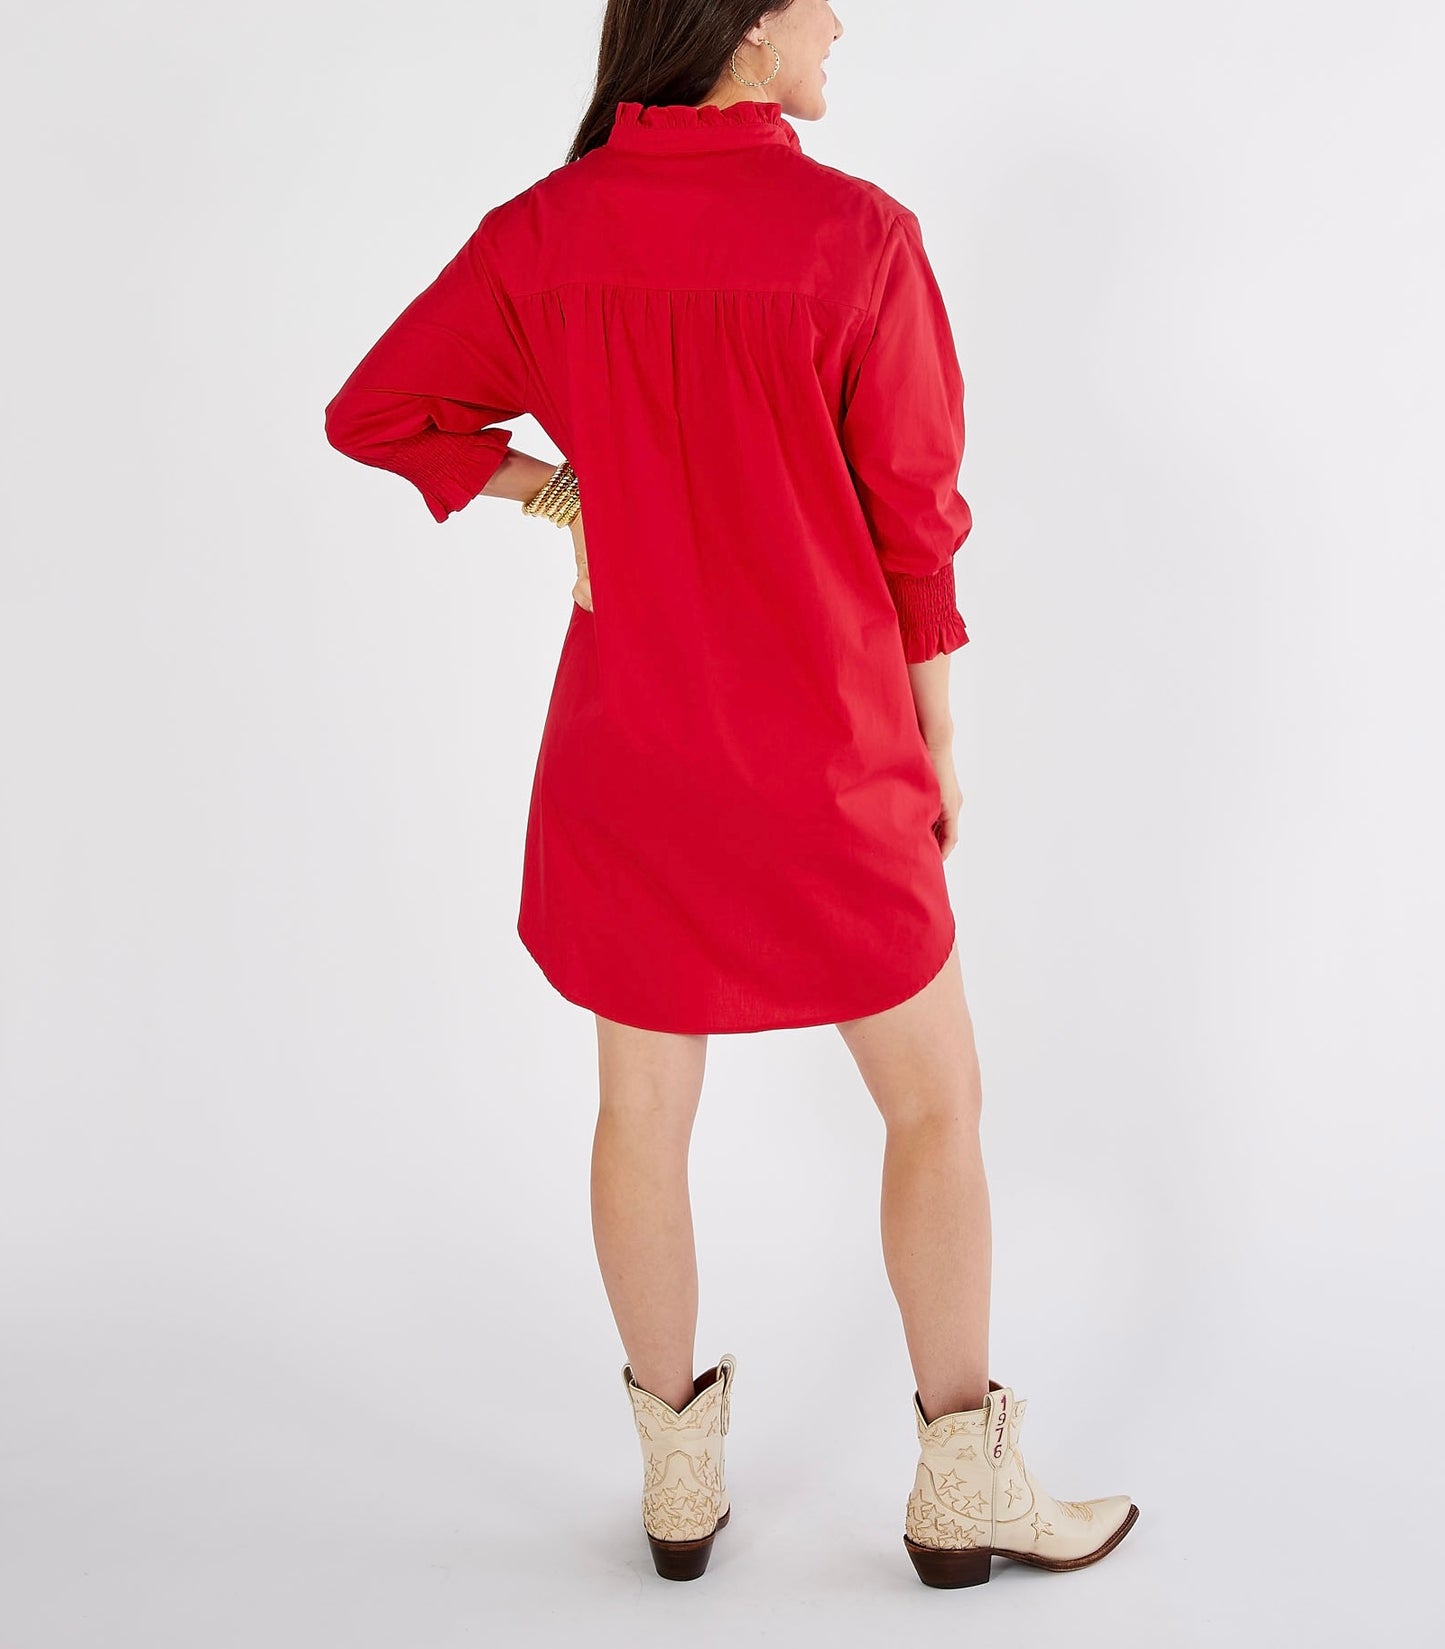 Kimberly Game Day Dress by Caryn Lawn